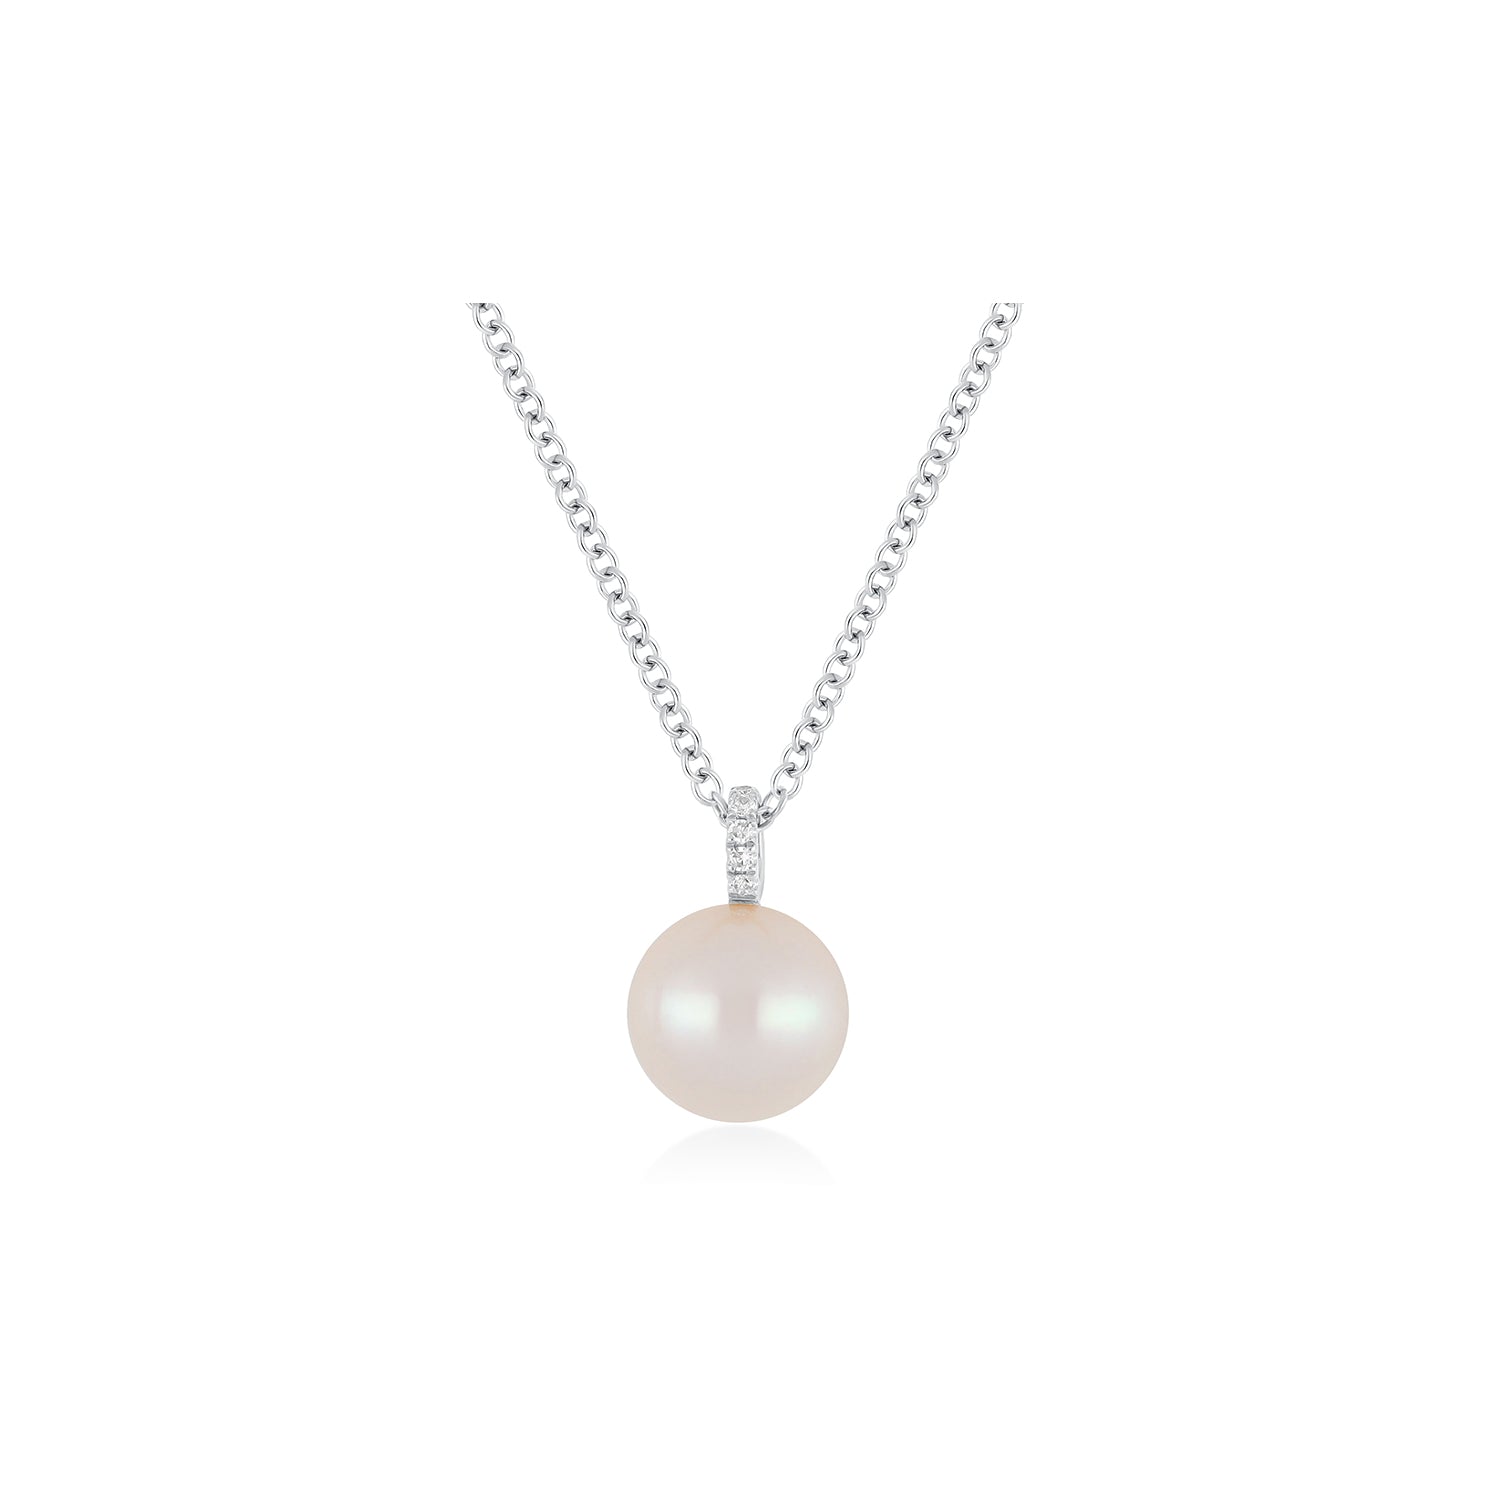 Pearl Ball Drop Necklace in 14k white gold